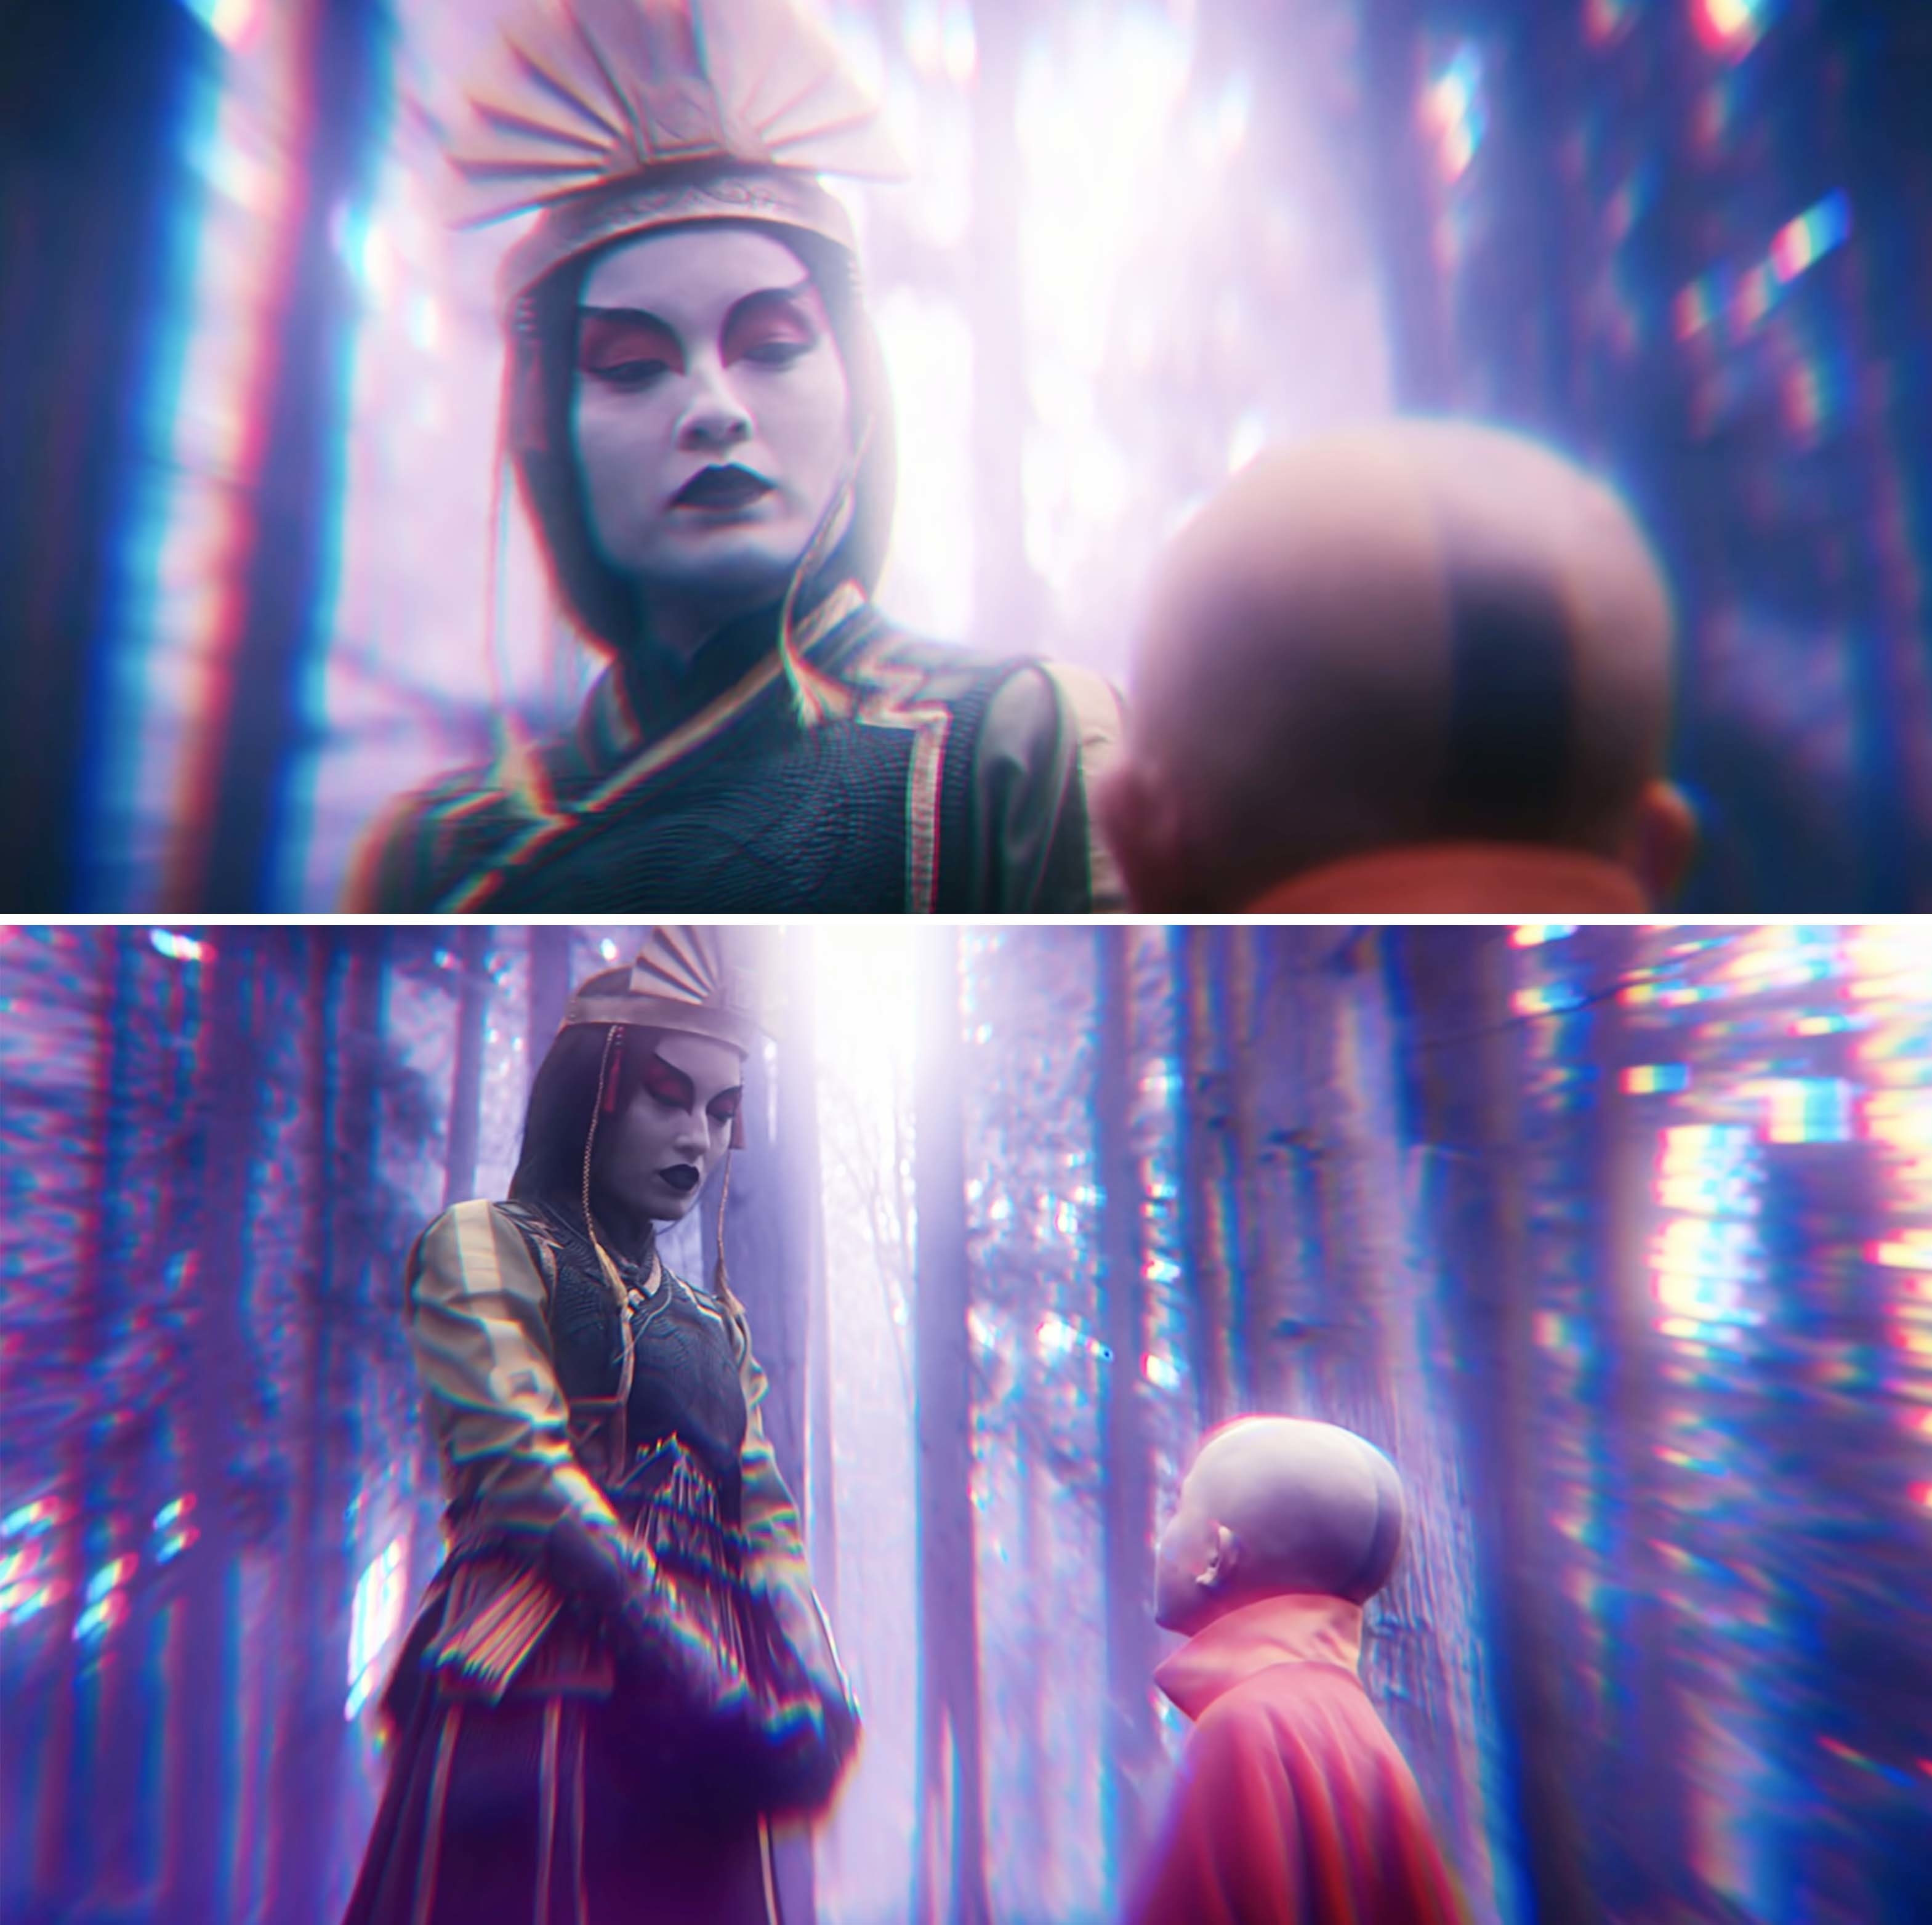 in a dream like scene, the past avator is standing in front of aang in the woods